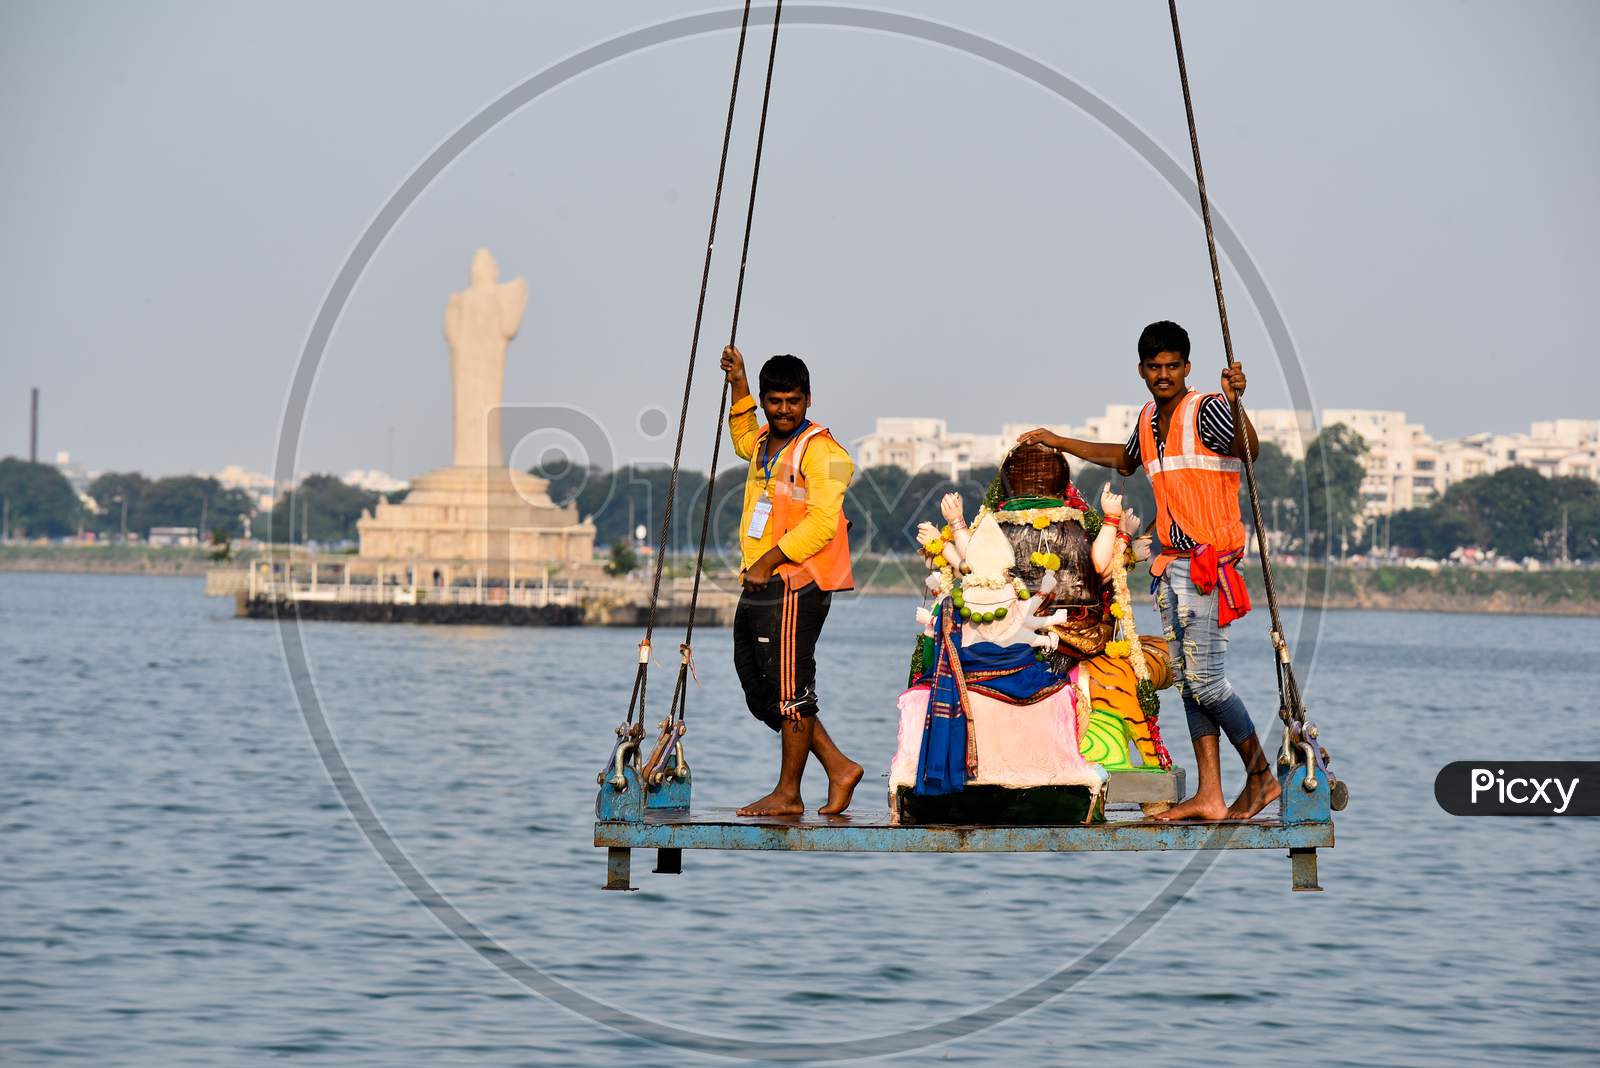 GHMC workers take Idol of Goddess Durga in a Crane for Immersion in Hussain Sagar on the last day of Navratri in Hyderabad, October 26, 2020.